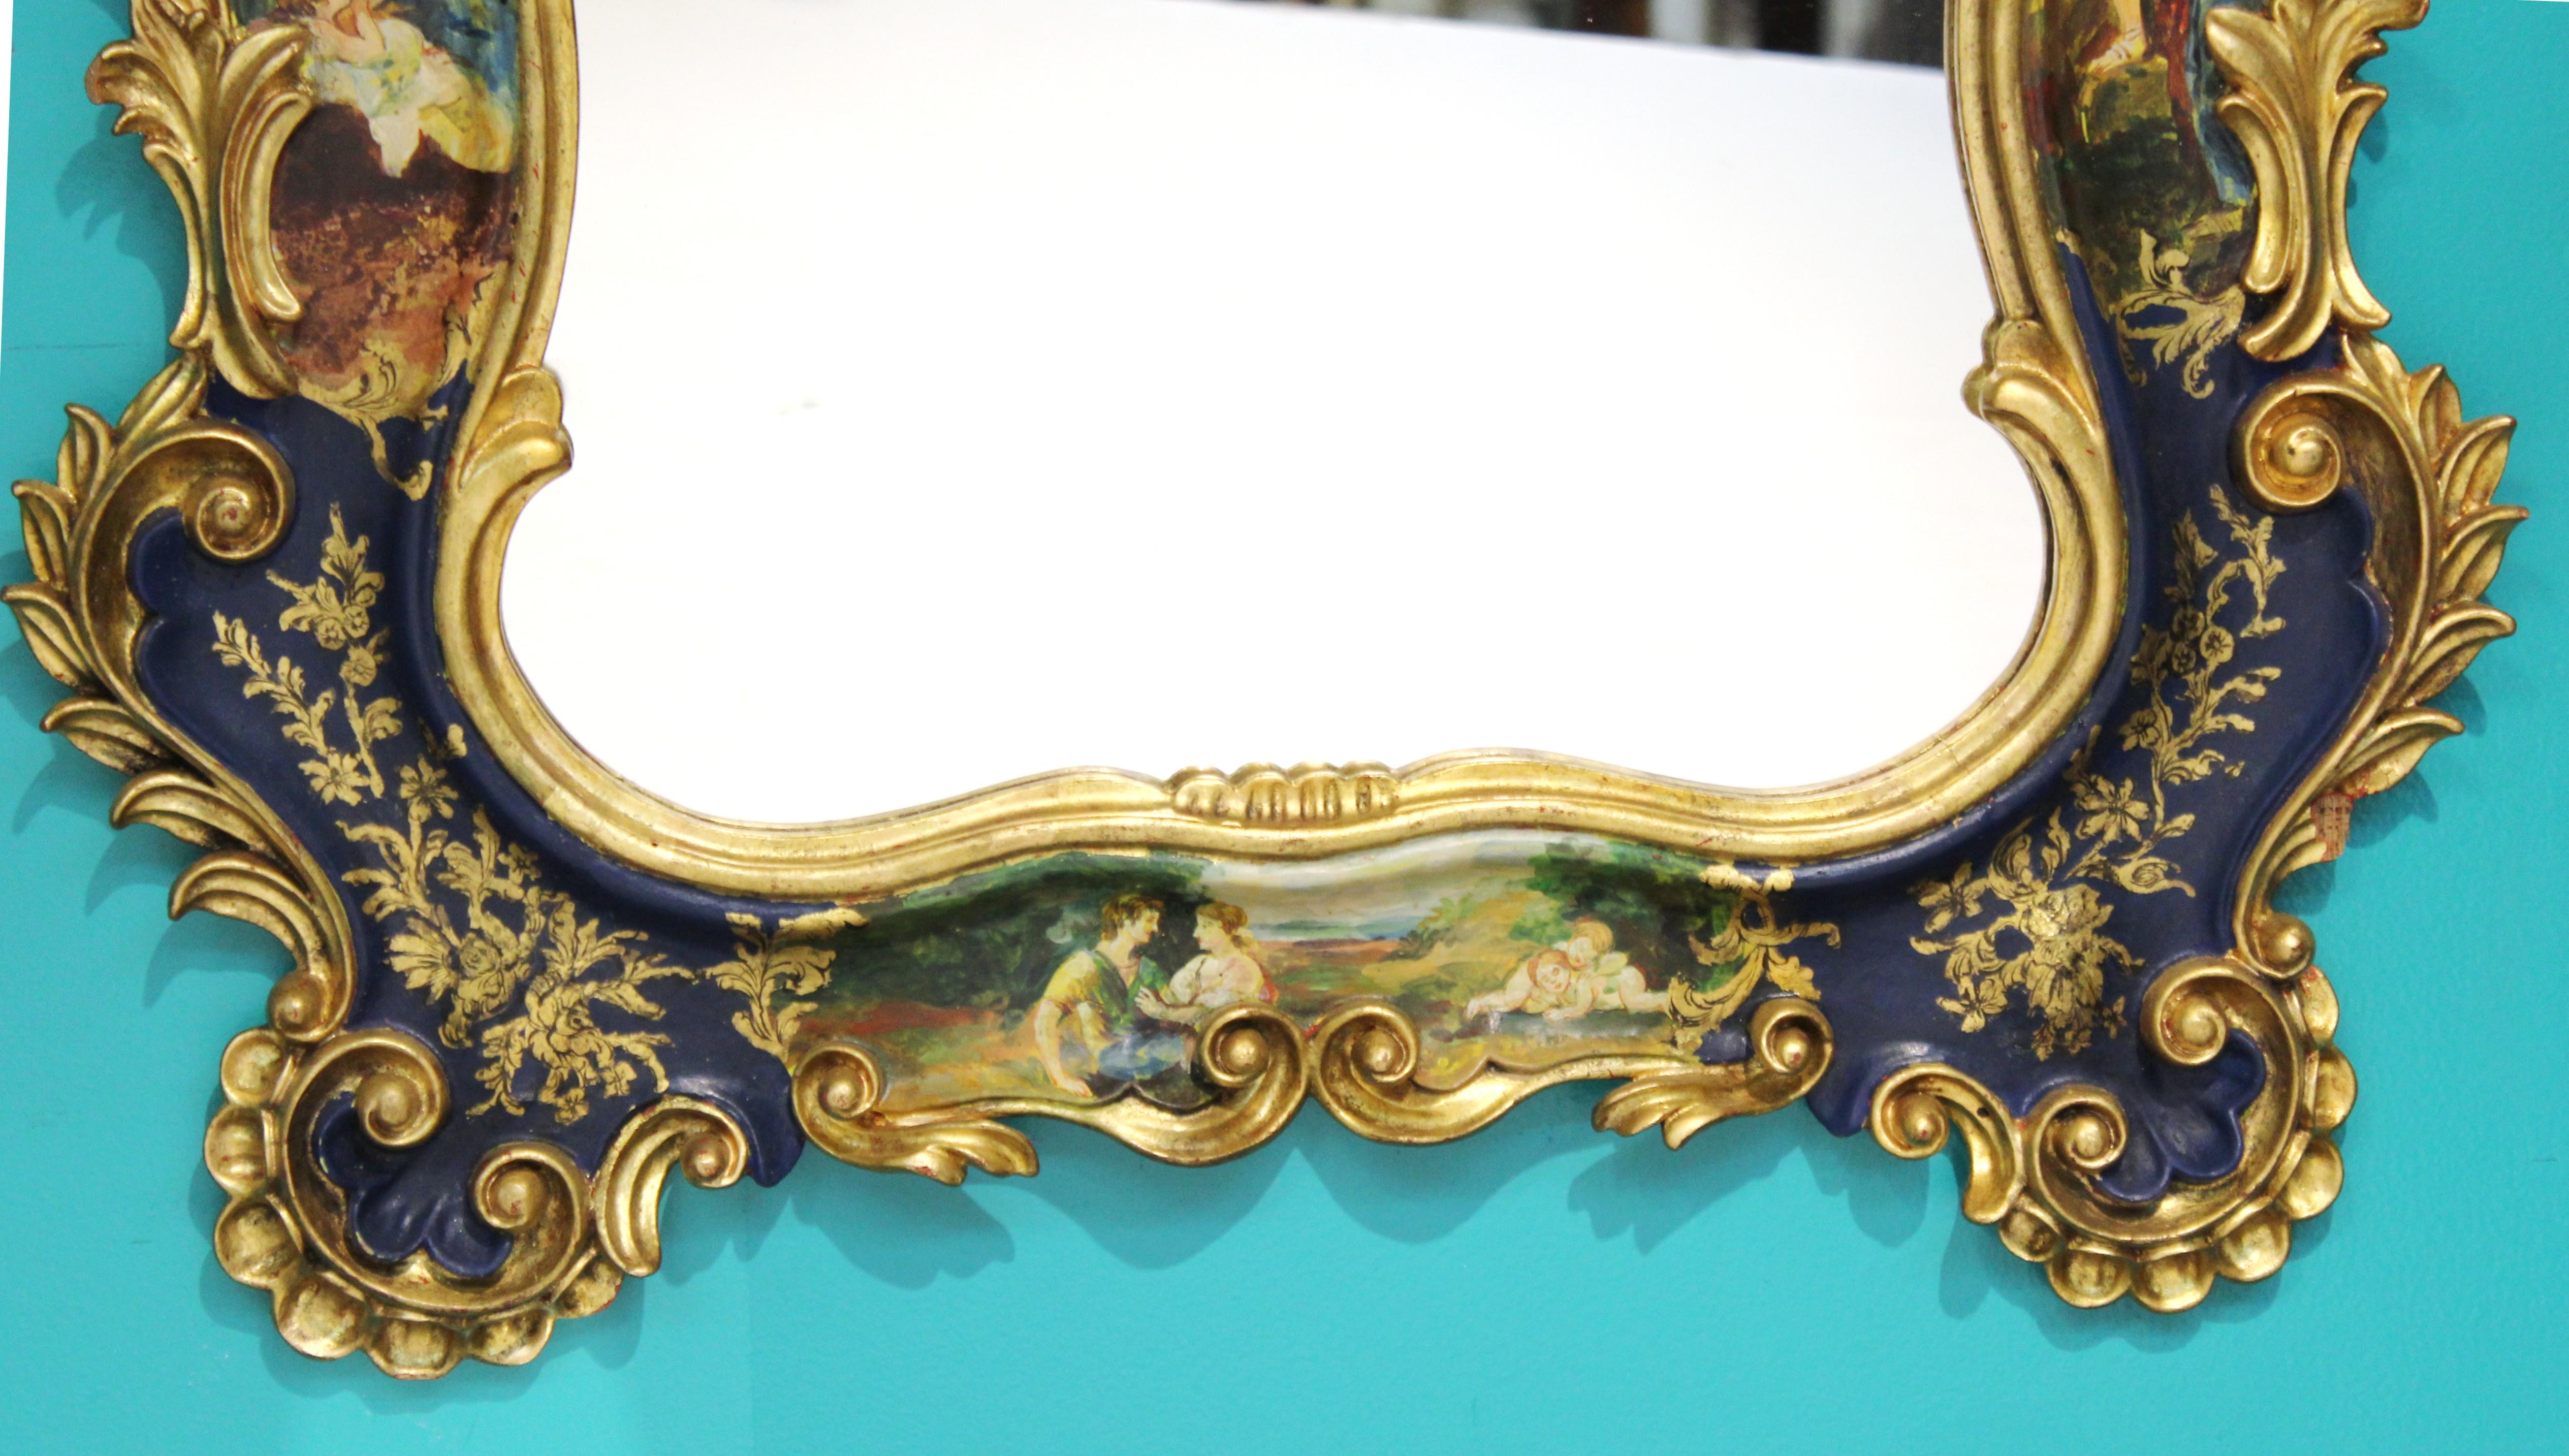 Italian Rococo Revival style hand painted wall mirror with elaborate decorations. Hand carved wood frame depicting bucolic scenes of romantic pursuits, painted in blues and greens, with giltwood embellishments. Made in Italy during the 1950s, the